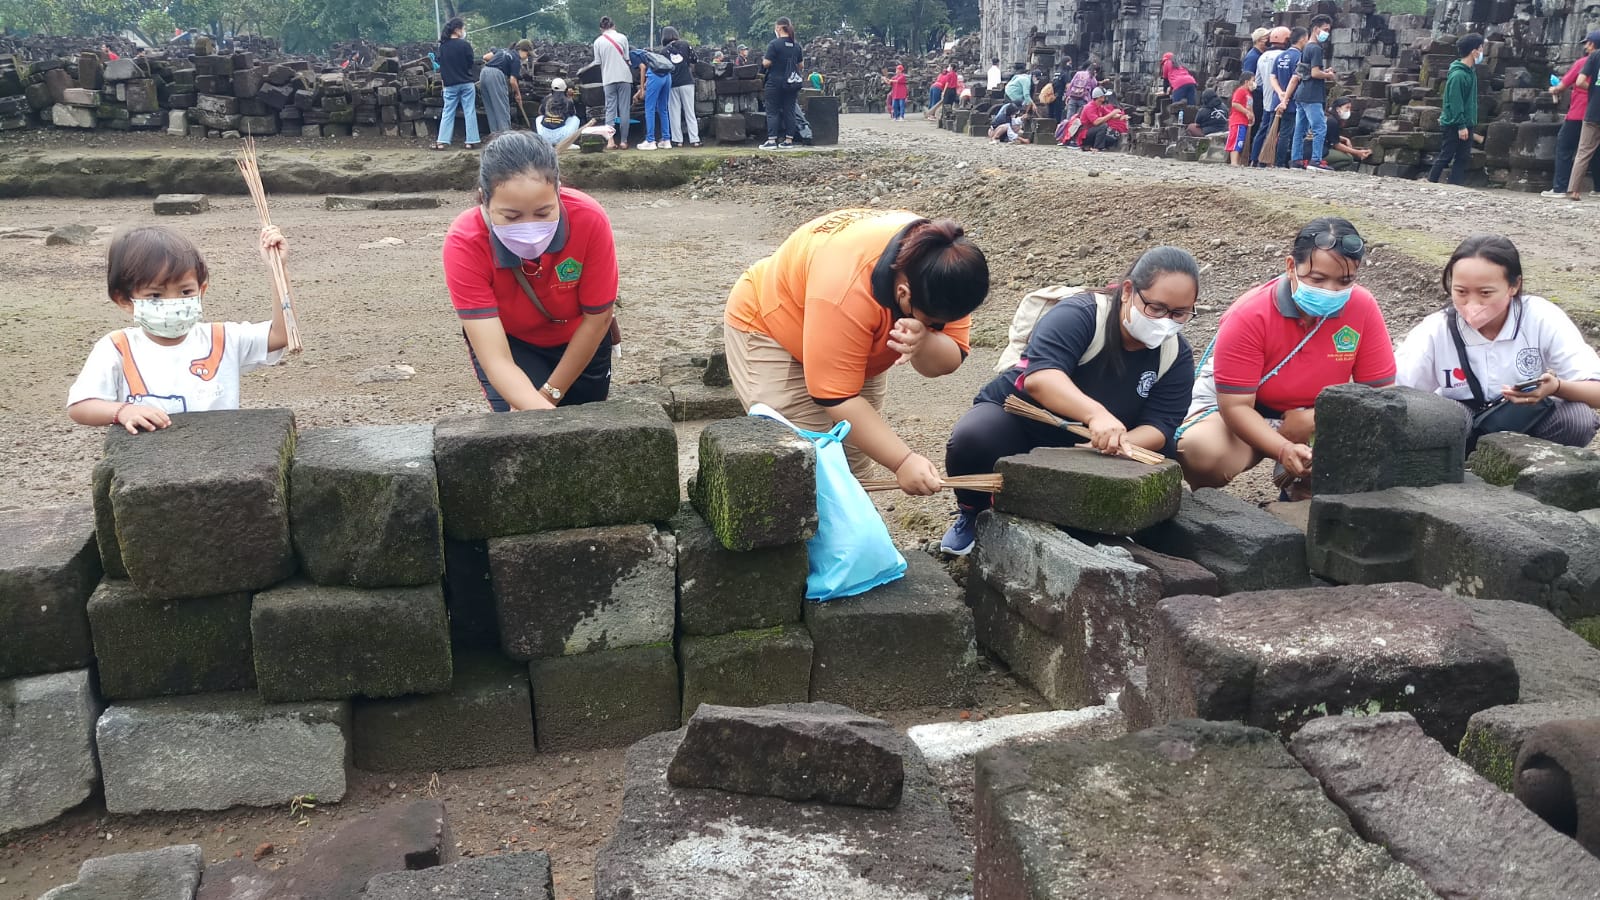 You are currently viewing Baksos Lintas Agama Di Candi Sewu